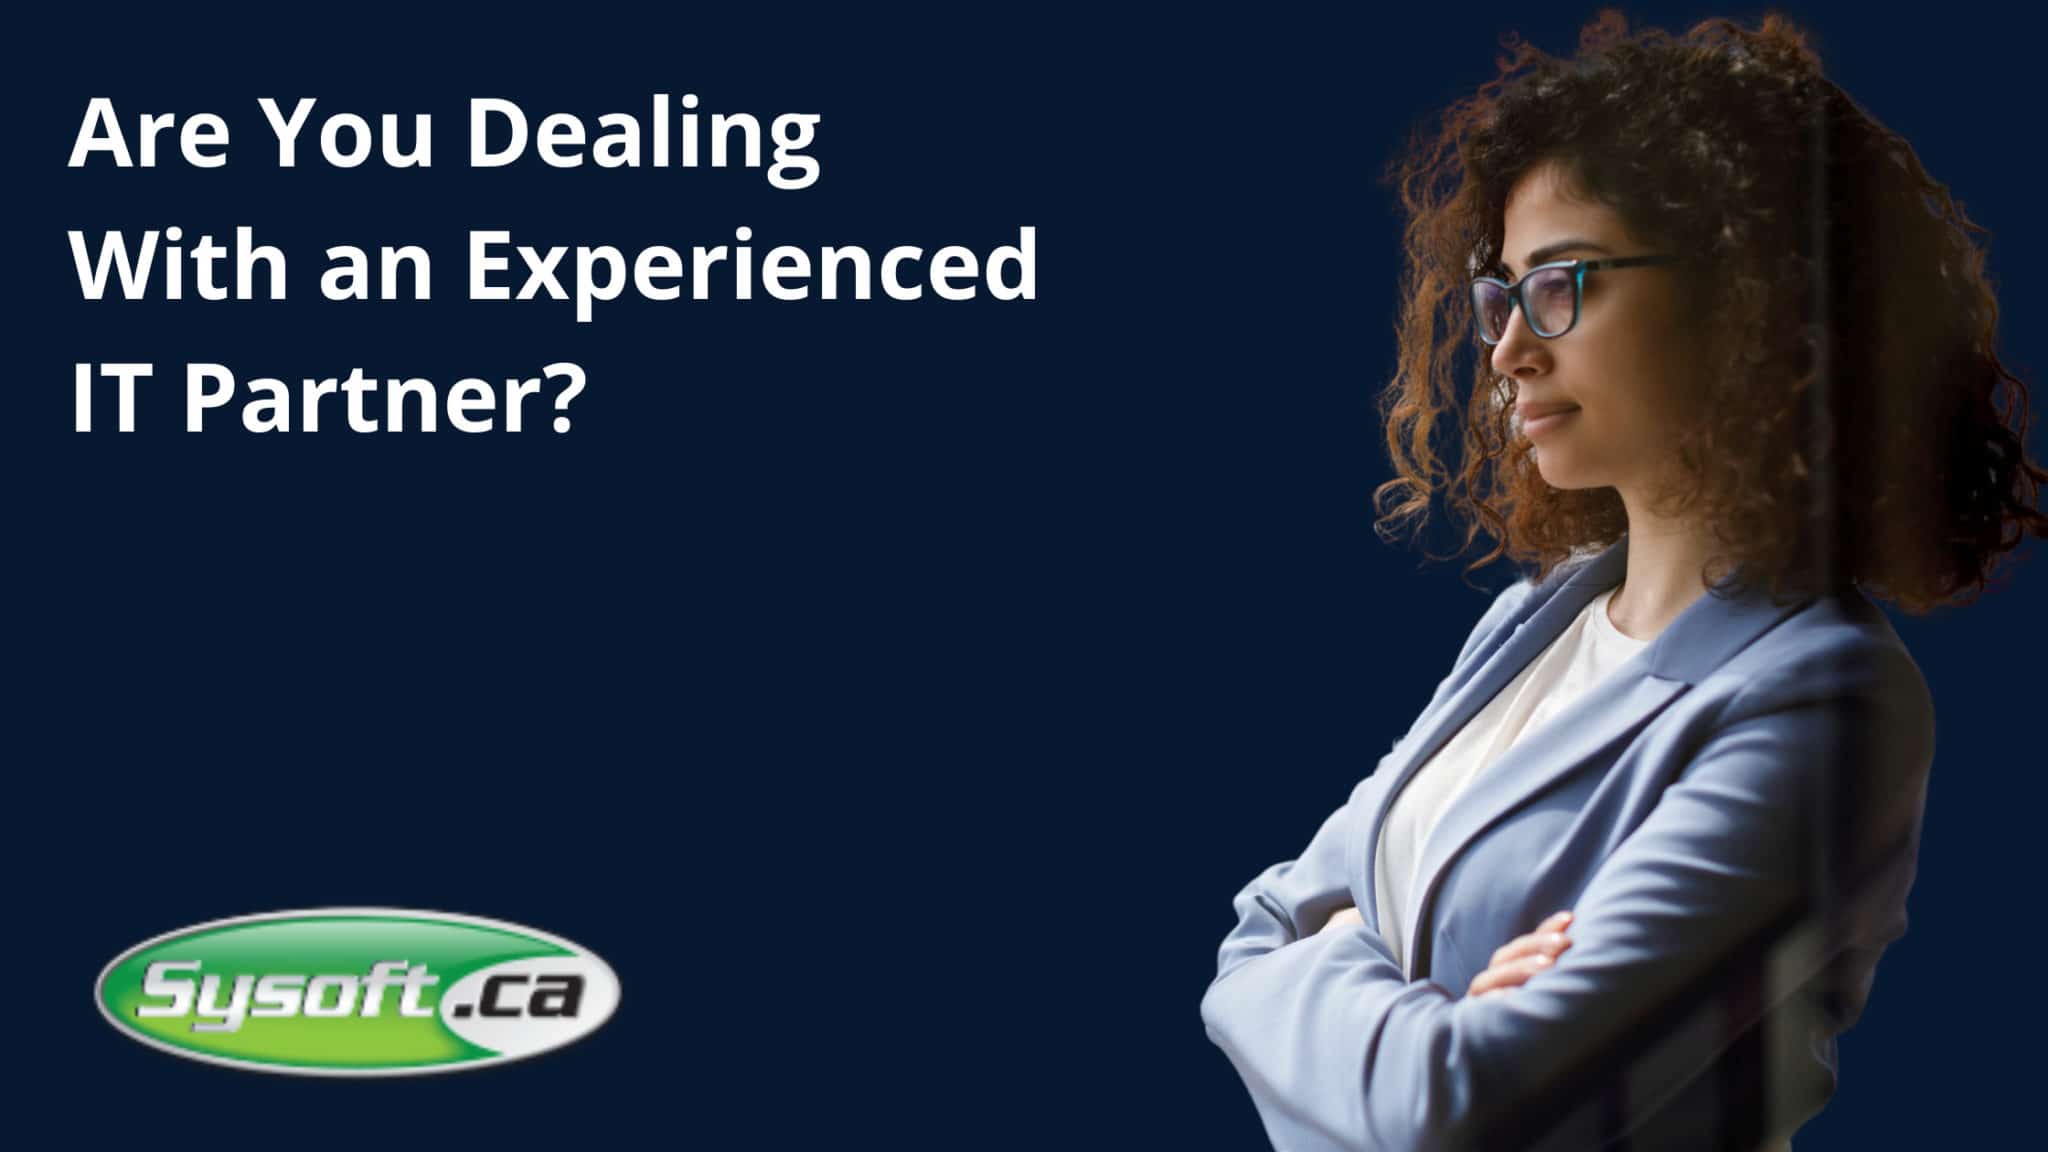 Are You Dealing With an Experienced IT Partner?